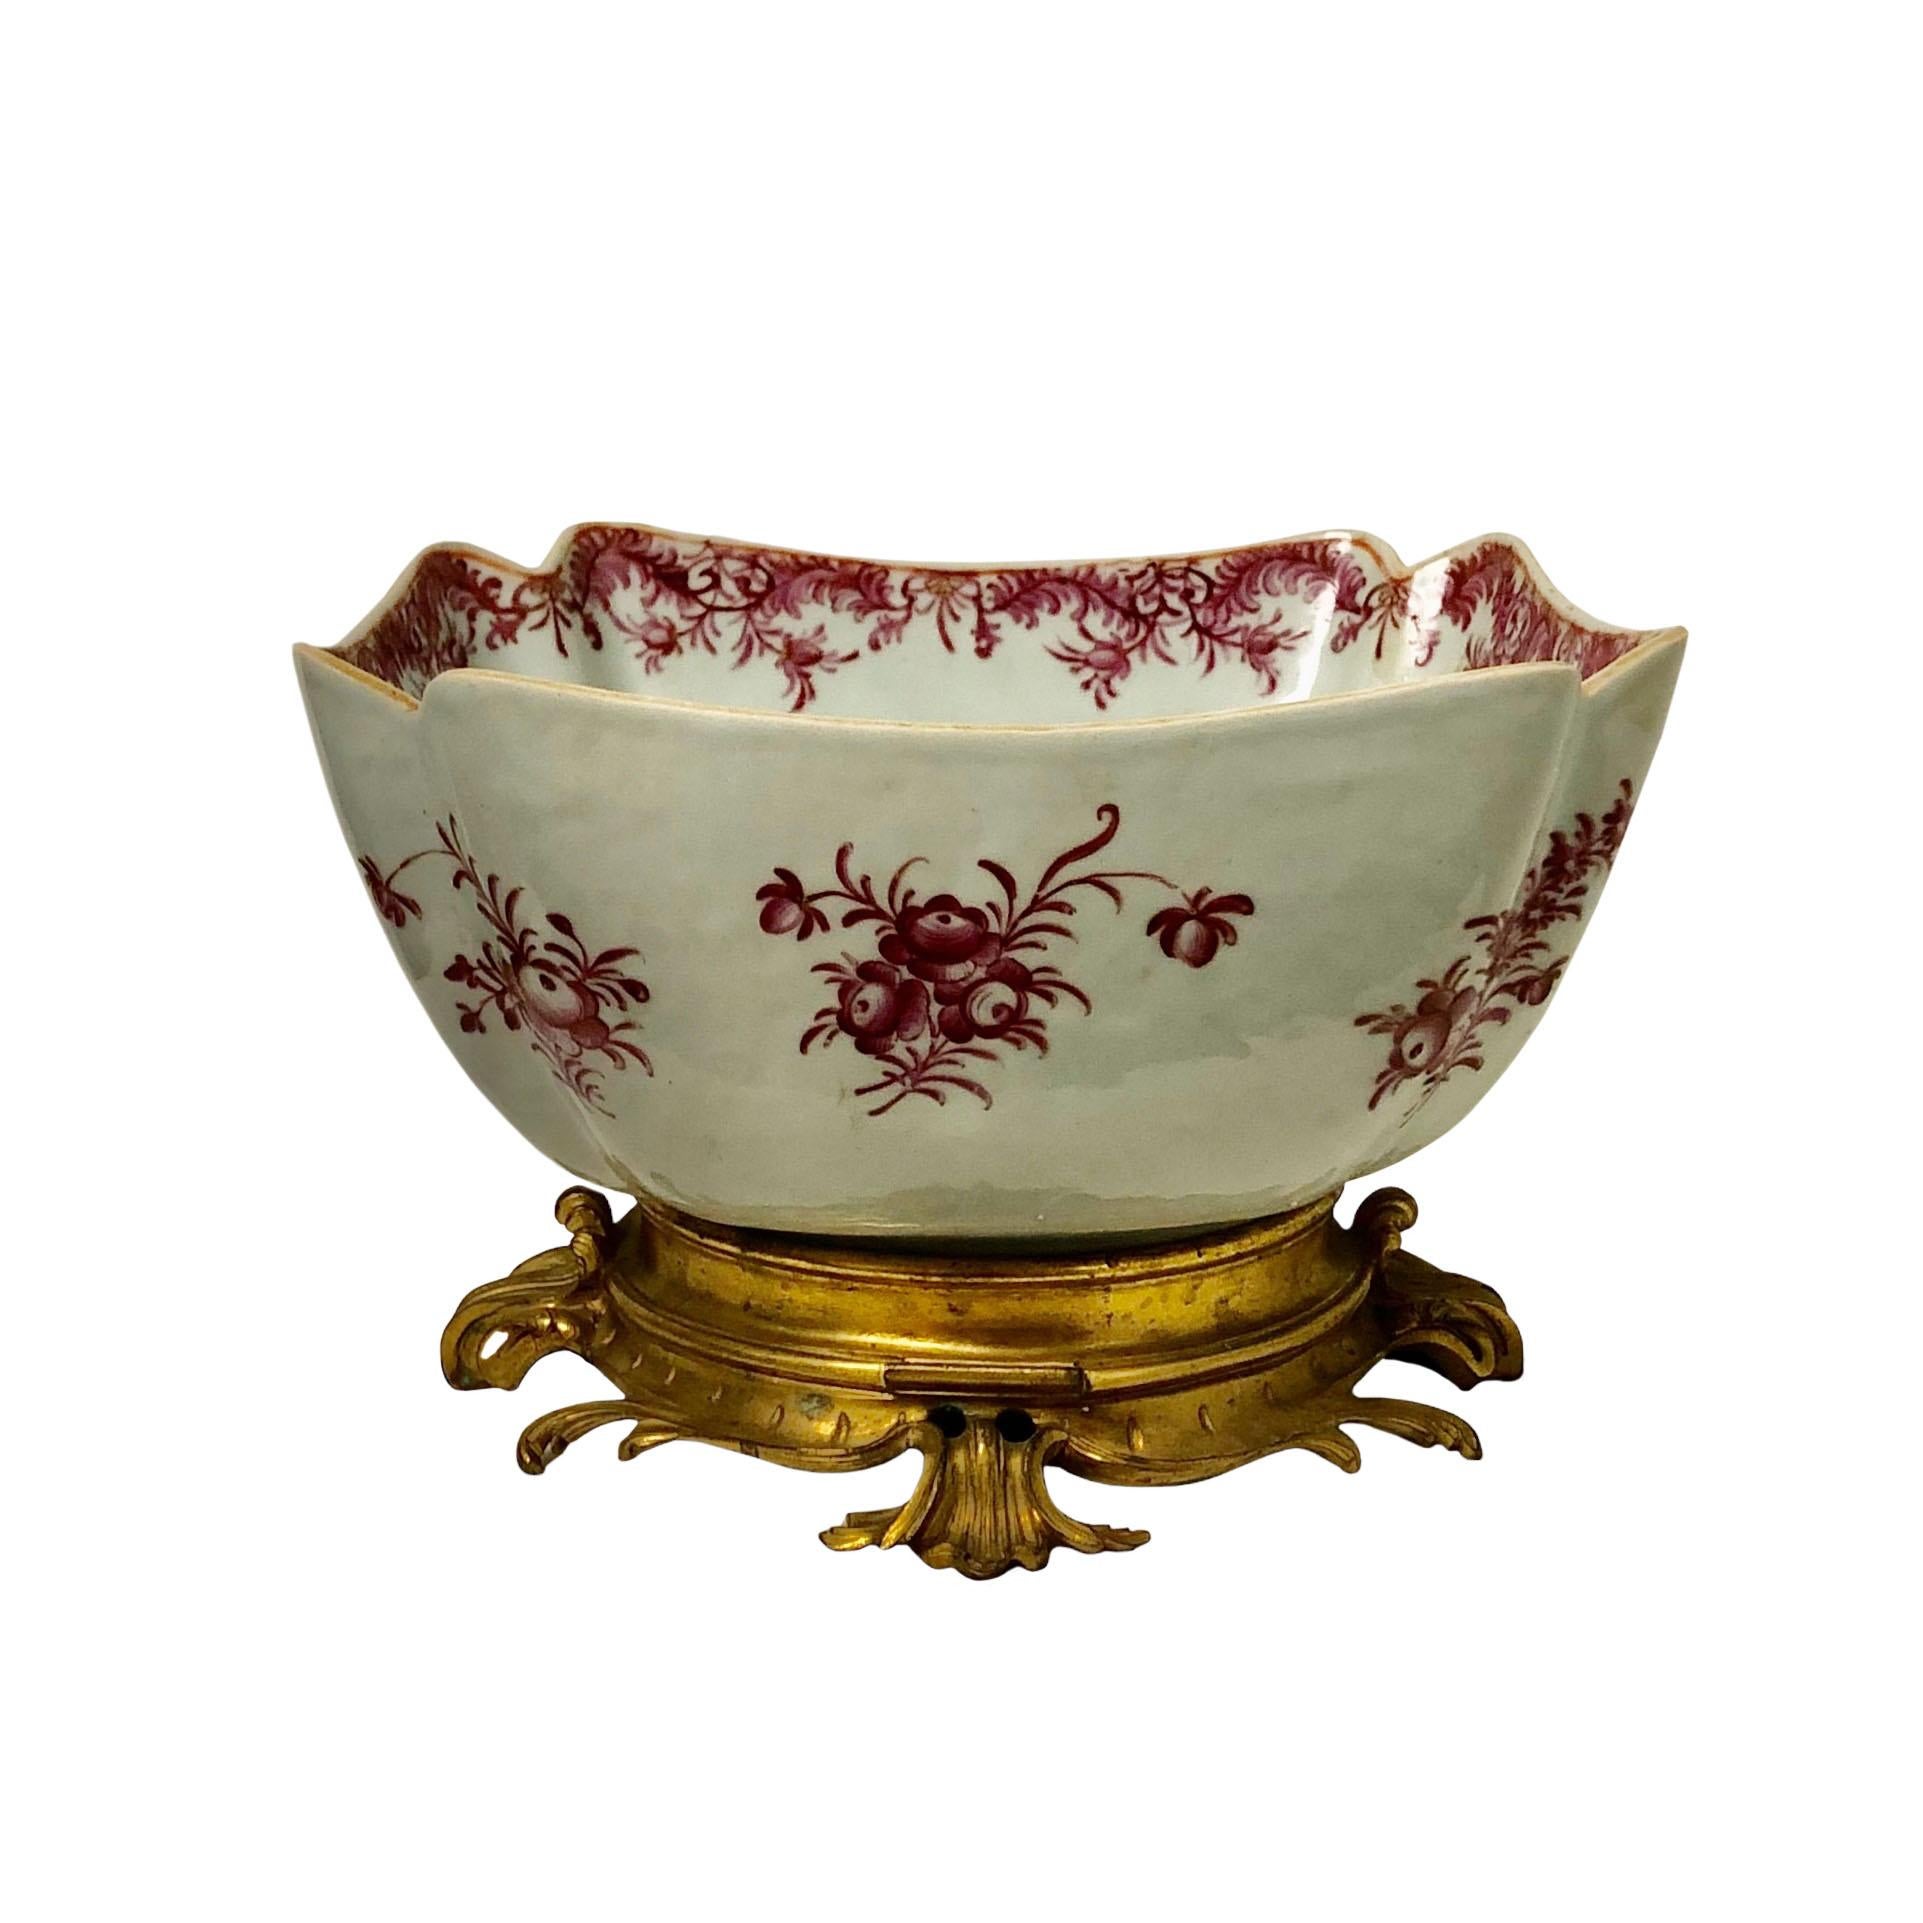 A late 18th century to early 19th century Chinese export bowl with a doré bronze French rococo base mounted onto the bowl. Bowl is decorated with raspberry colored flowers and is in mint condition. The bolt is 10